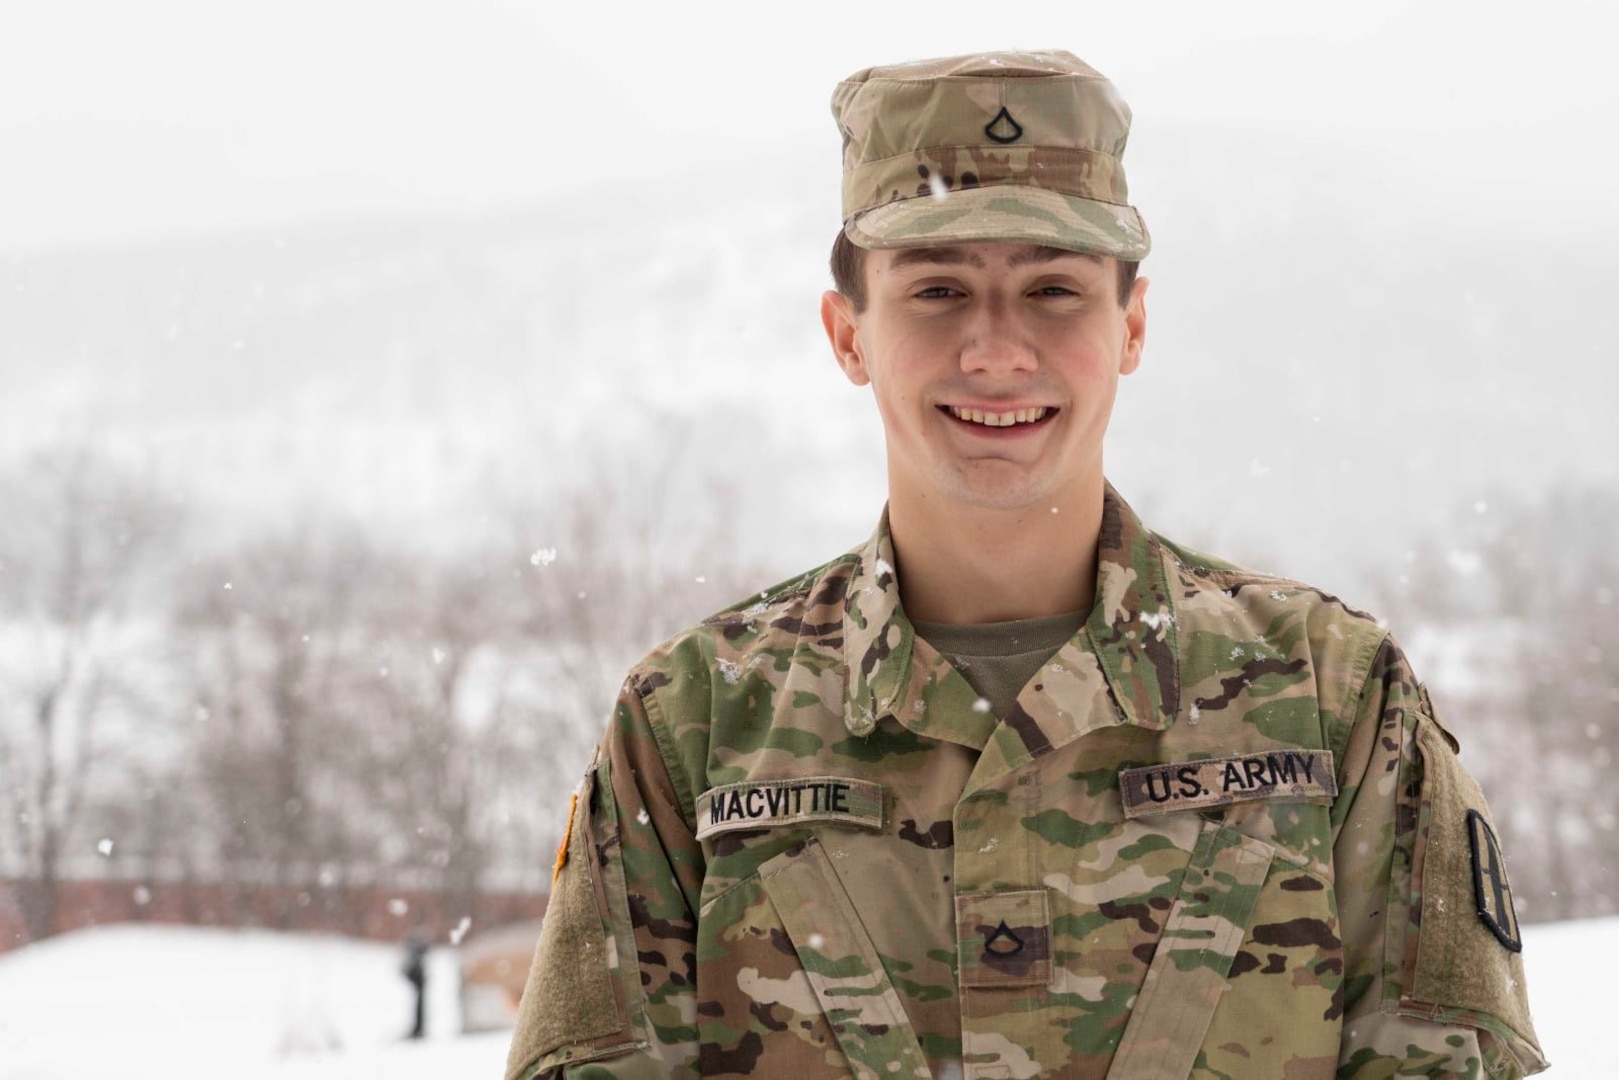 Pfc. Liam MacVittie helped rescue a Stratford, New Hampshire woman from her burning home Feb. 2, 2022. Photo by Staff Sgt. Taylor Queen, 157 ARW PA.